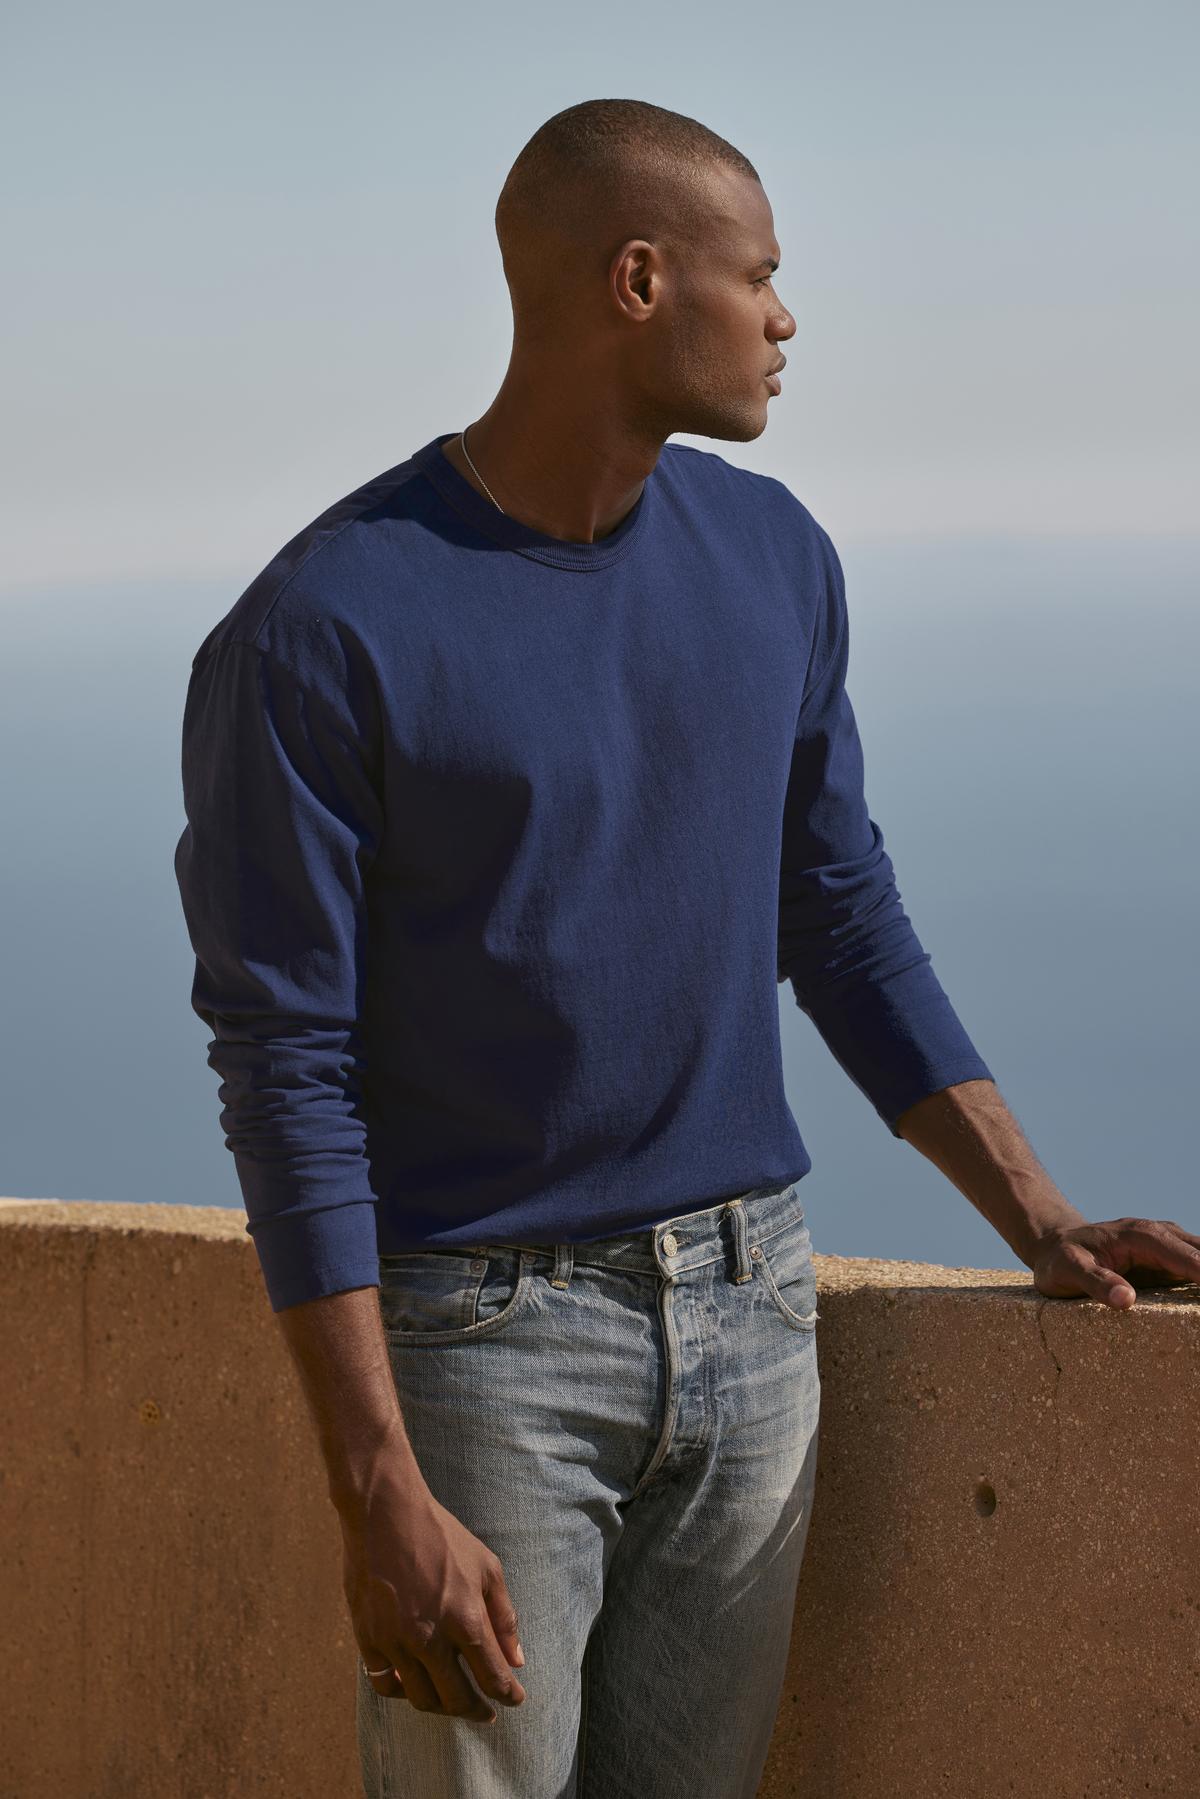   A man in an EDWARD CREW NECK TEE sweatshirt, made of cotton jersey, standing on a ledge overlooking the ocean. (Brand: Velvet by Graham & Spencer) 